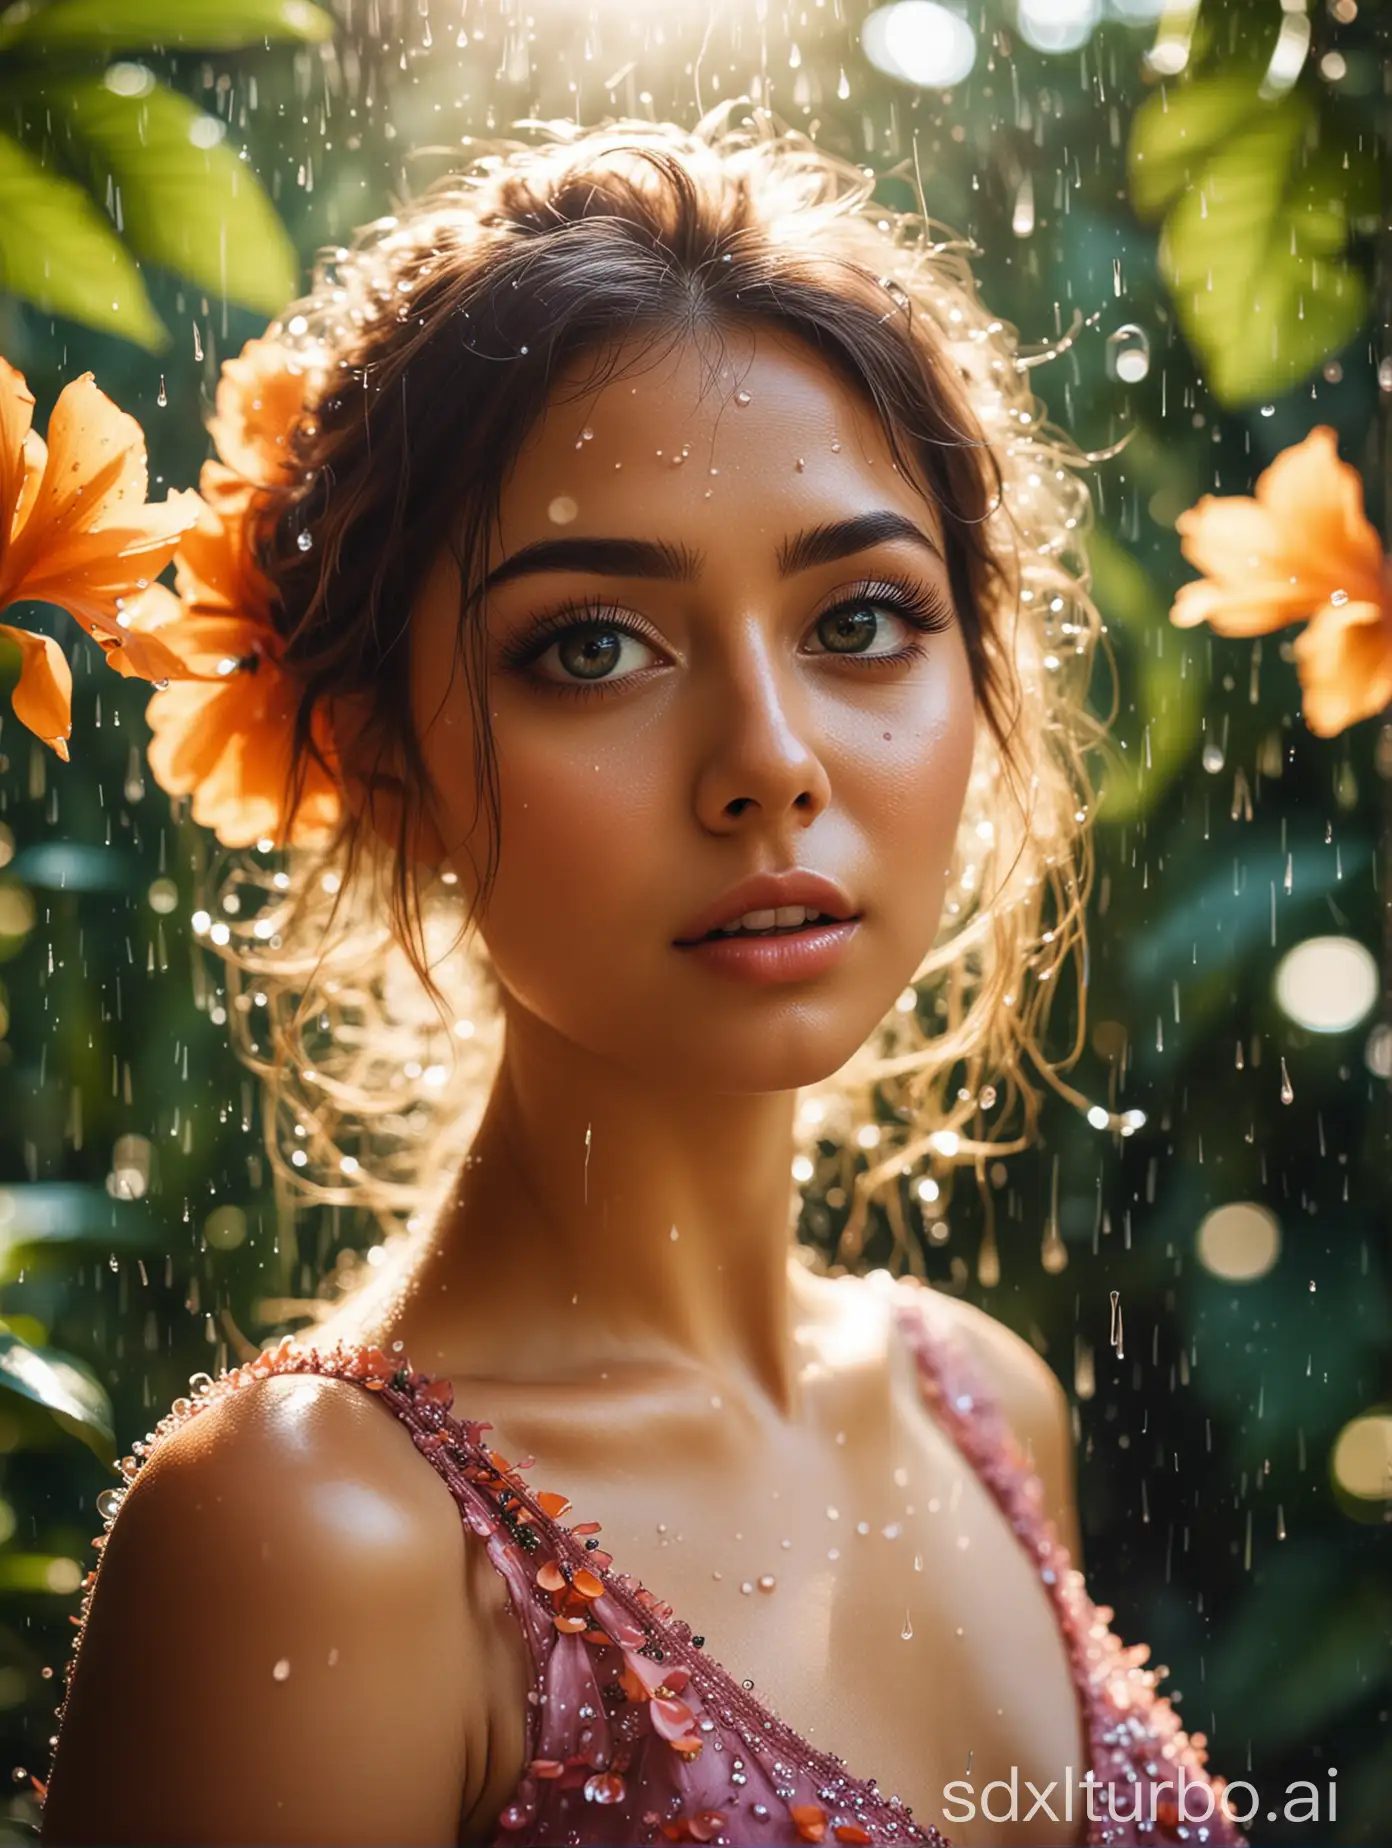 Tropical-Flower-Dance-Girl-in-Stunning-Dress-Amidst-Glowing-Petals